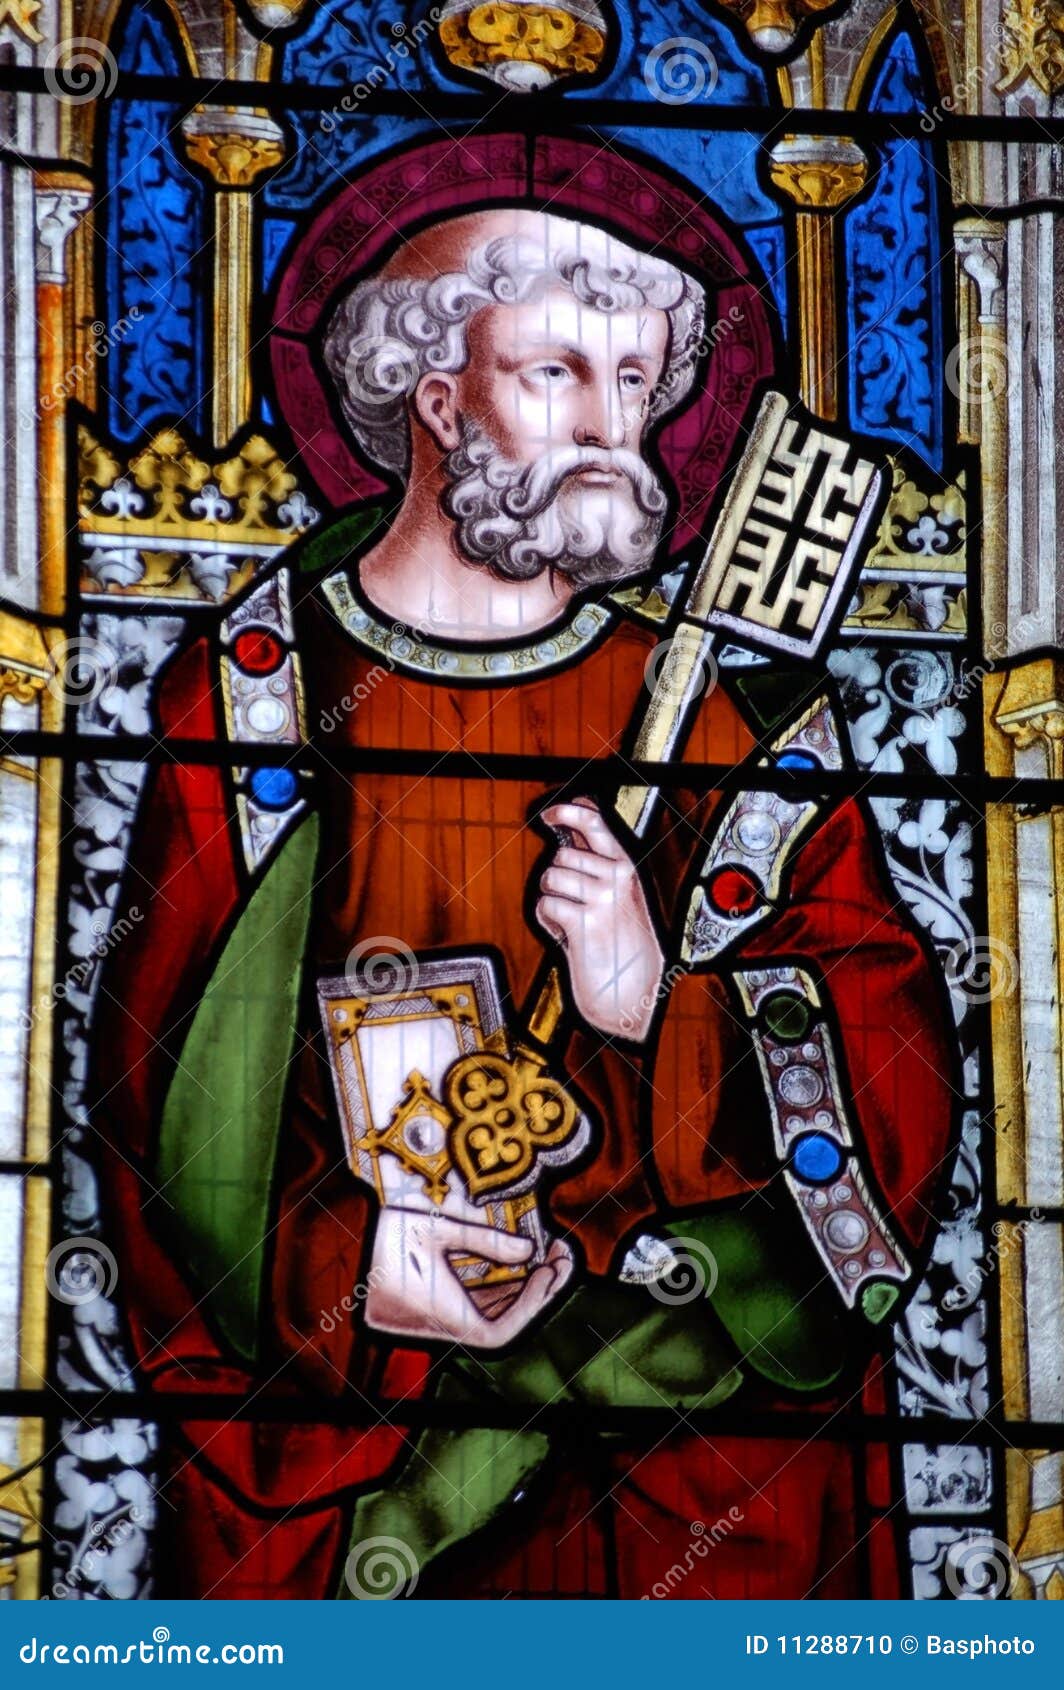 saint peter stained glass window